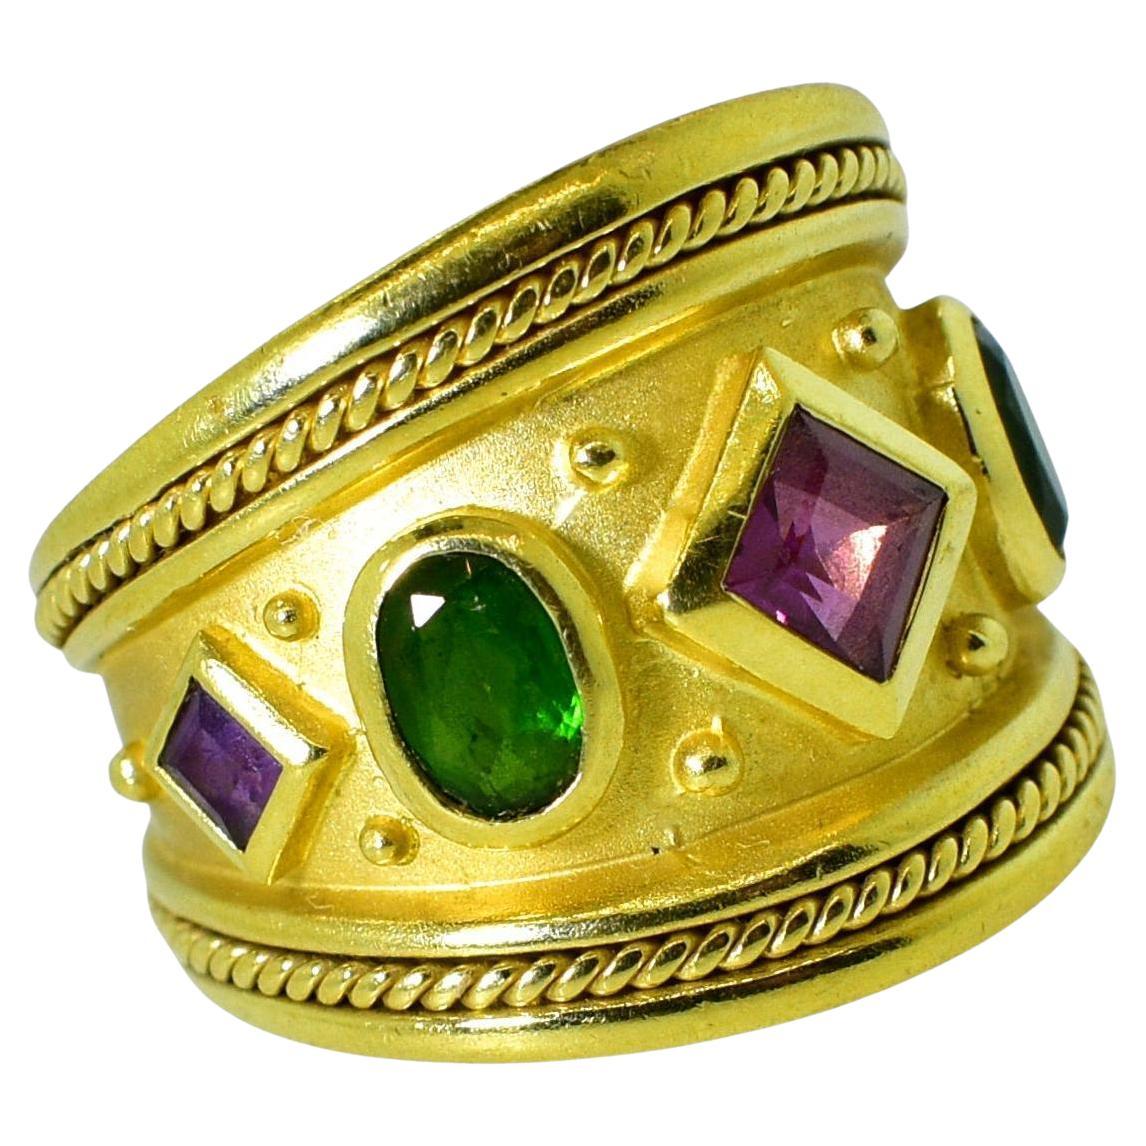 18K, 750, gold possessing a center square cut bright pink tourmaline, two oval bright green tourmaline and two square cut amethysts. This well made ring, with both a patina of a high polish as well as a matte finish,  is a size 8.5 and can be